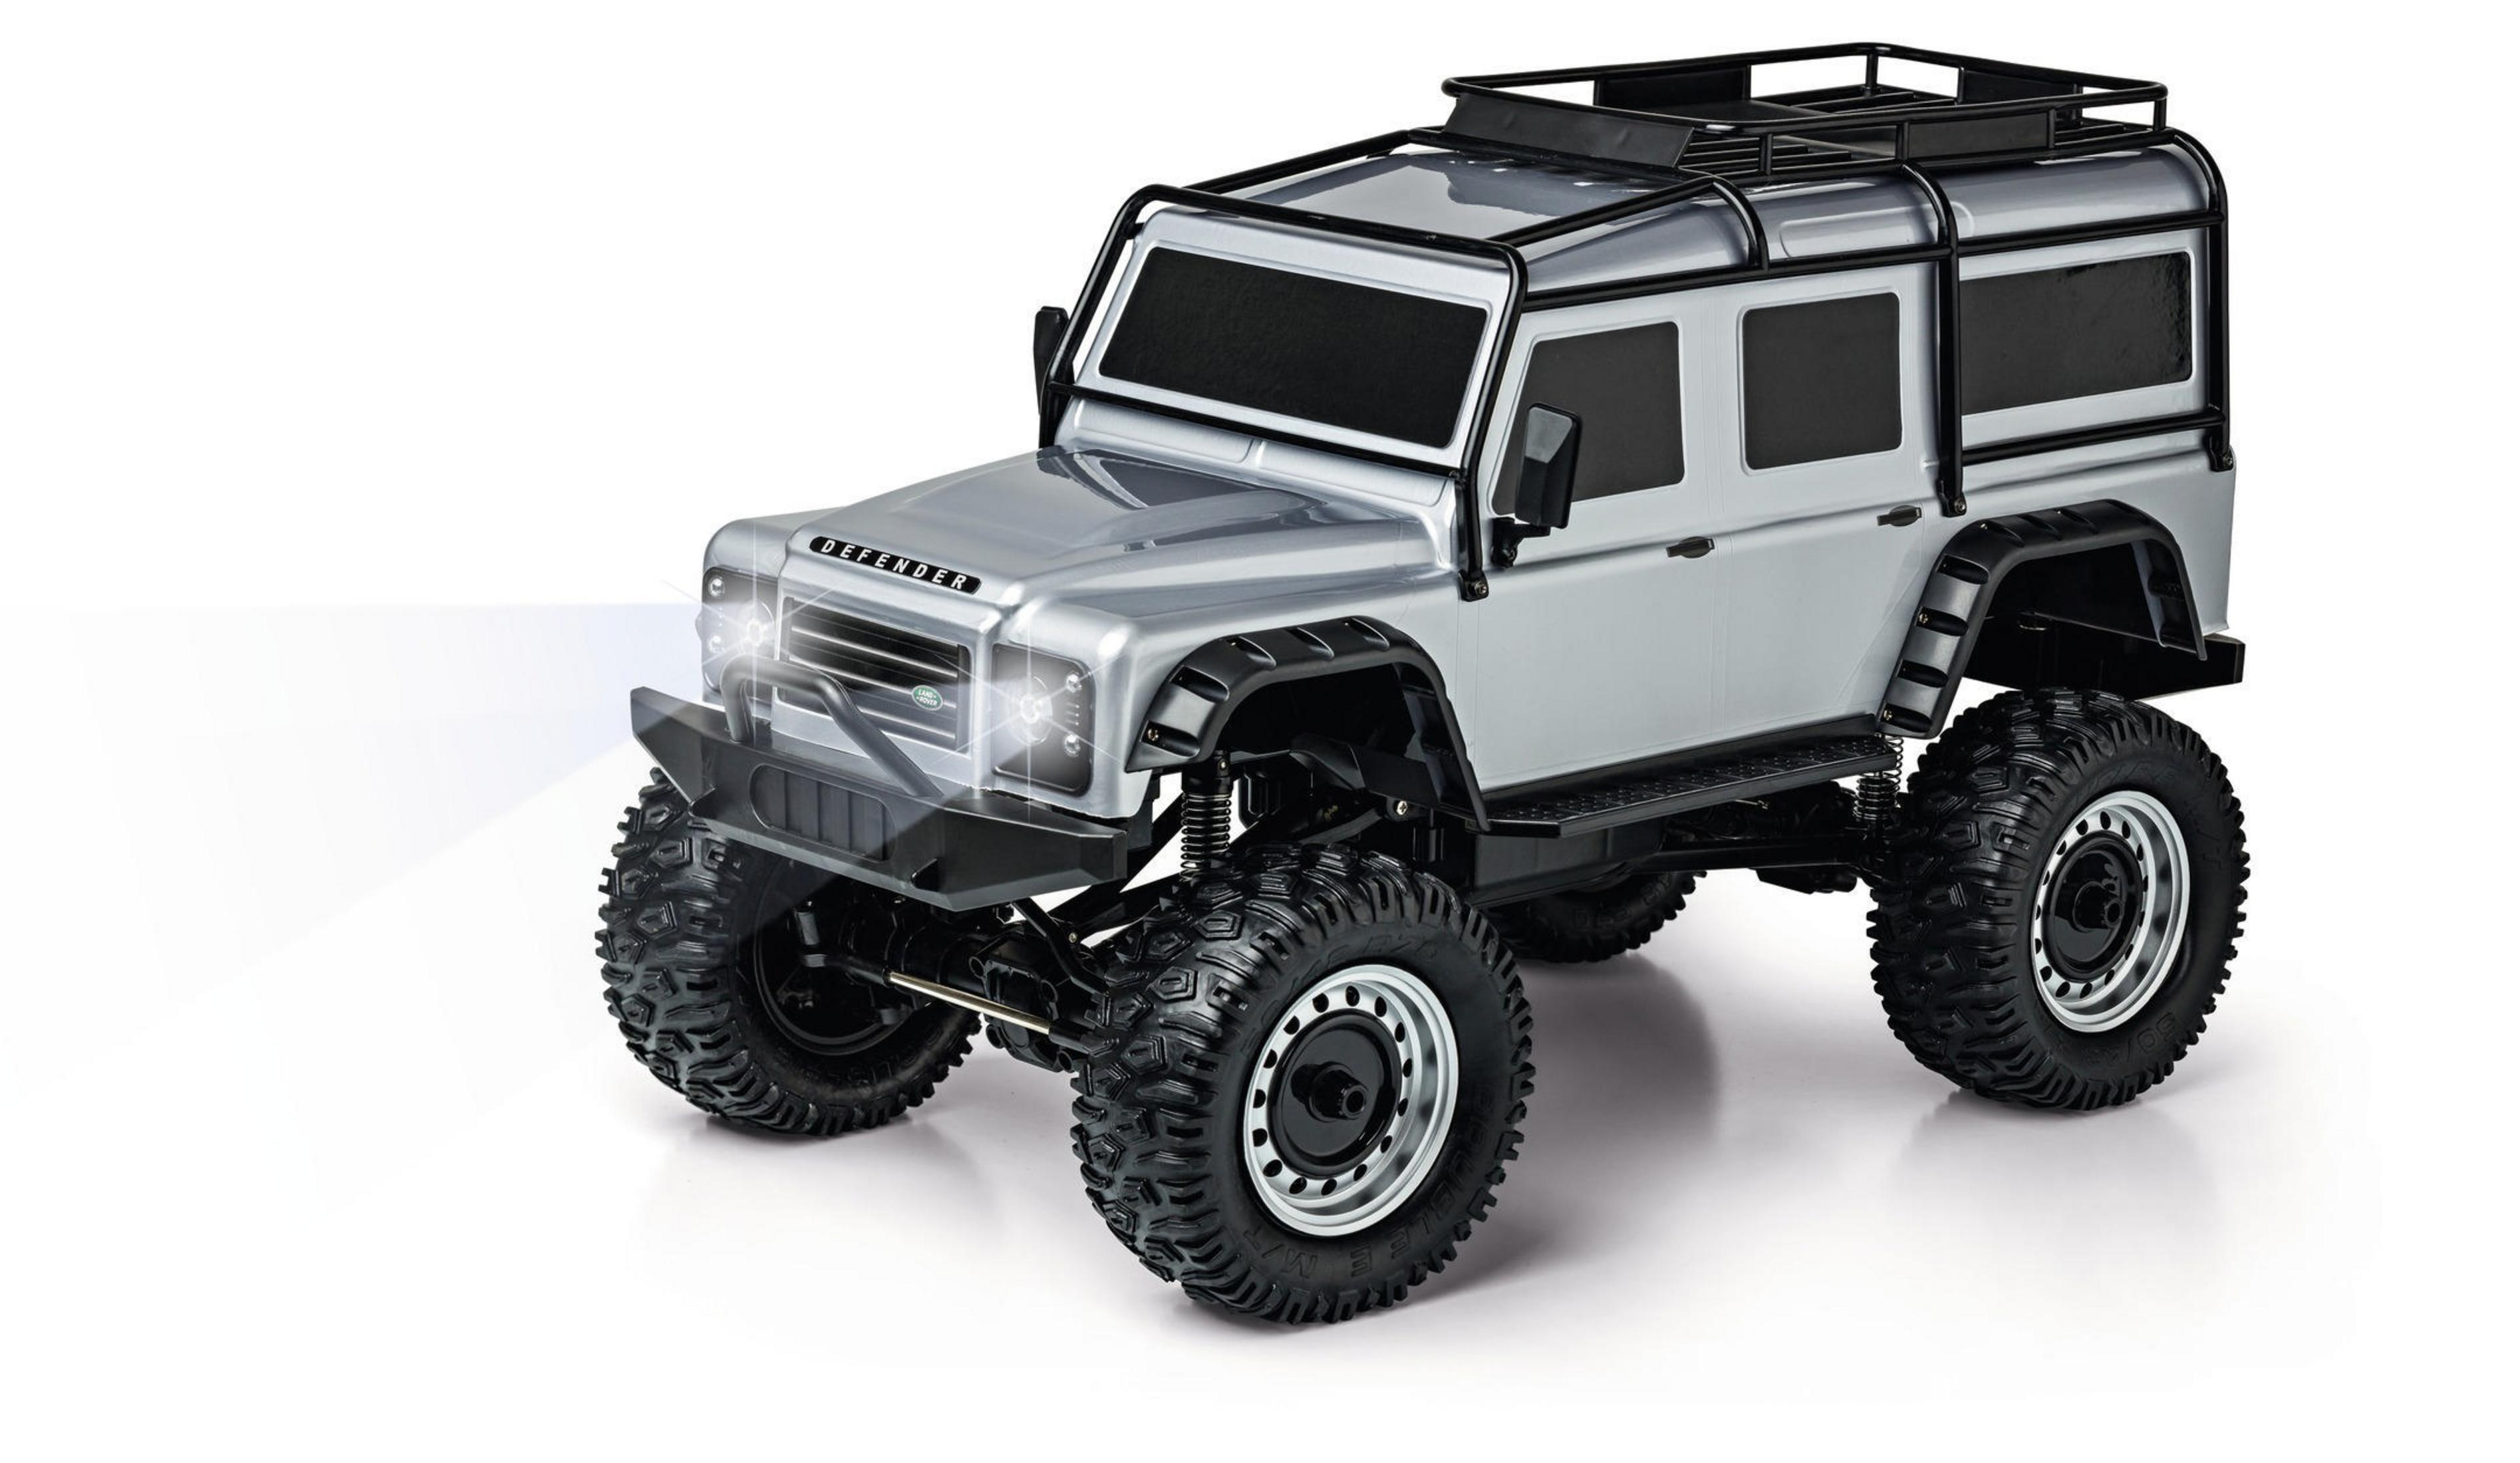 Silber LAND 500404172 Spielzeugmodell, 1:8 RTR DEFENDER CARSON ROVER SILBER 100%